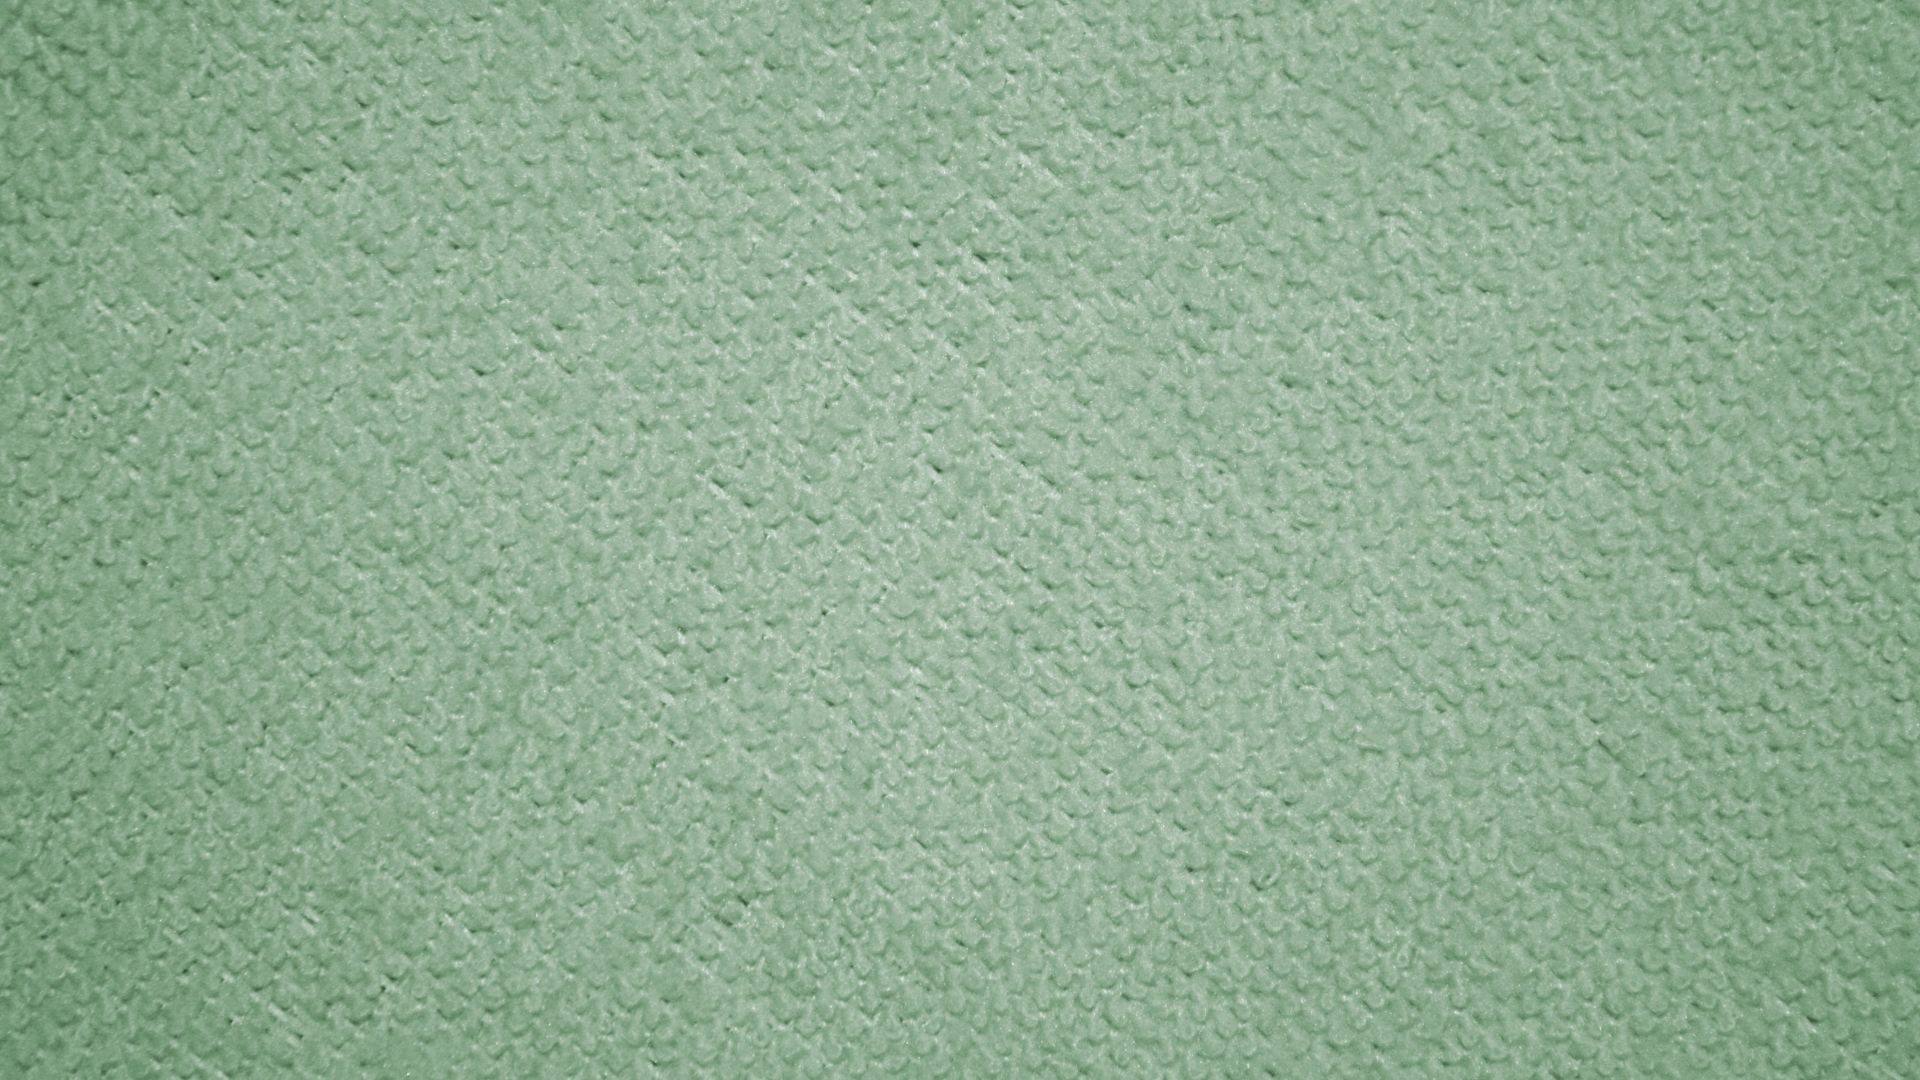 Sage Green Microfiber Cloth Fabric Texture Picture Texture HD Wallpaper